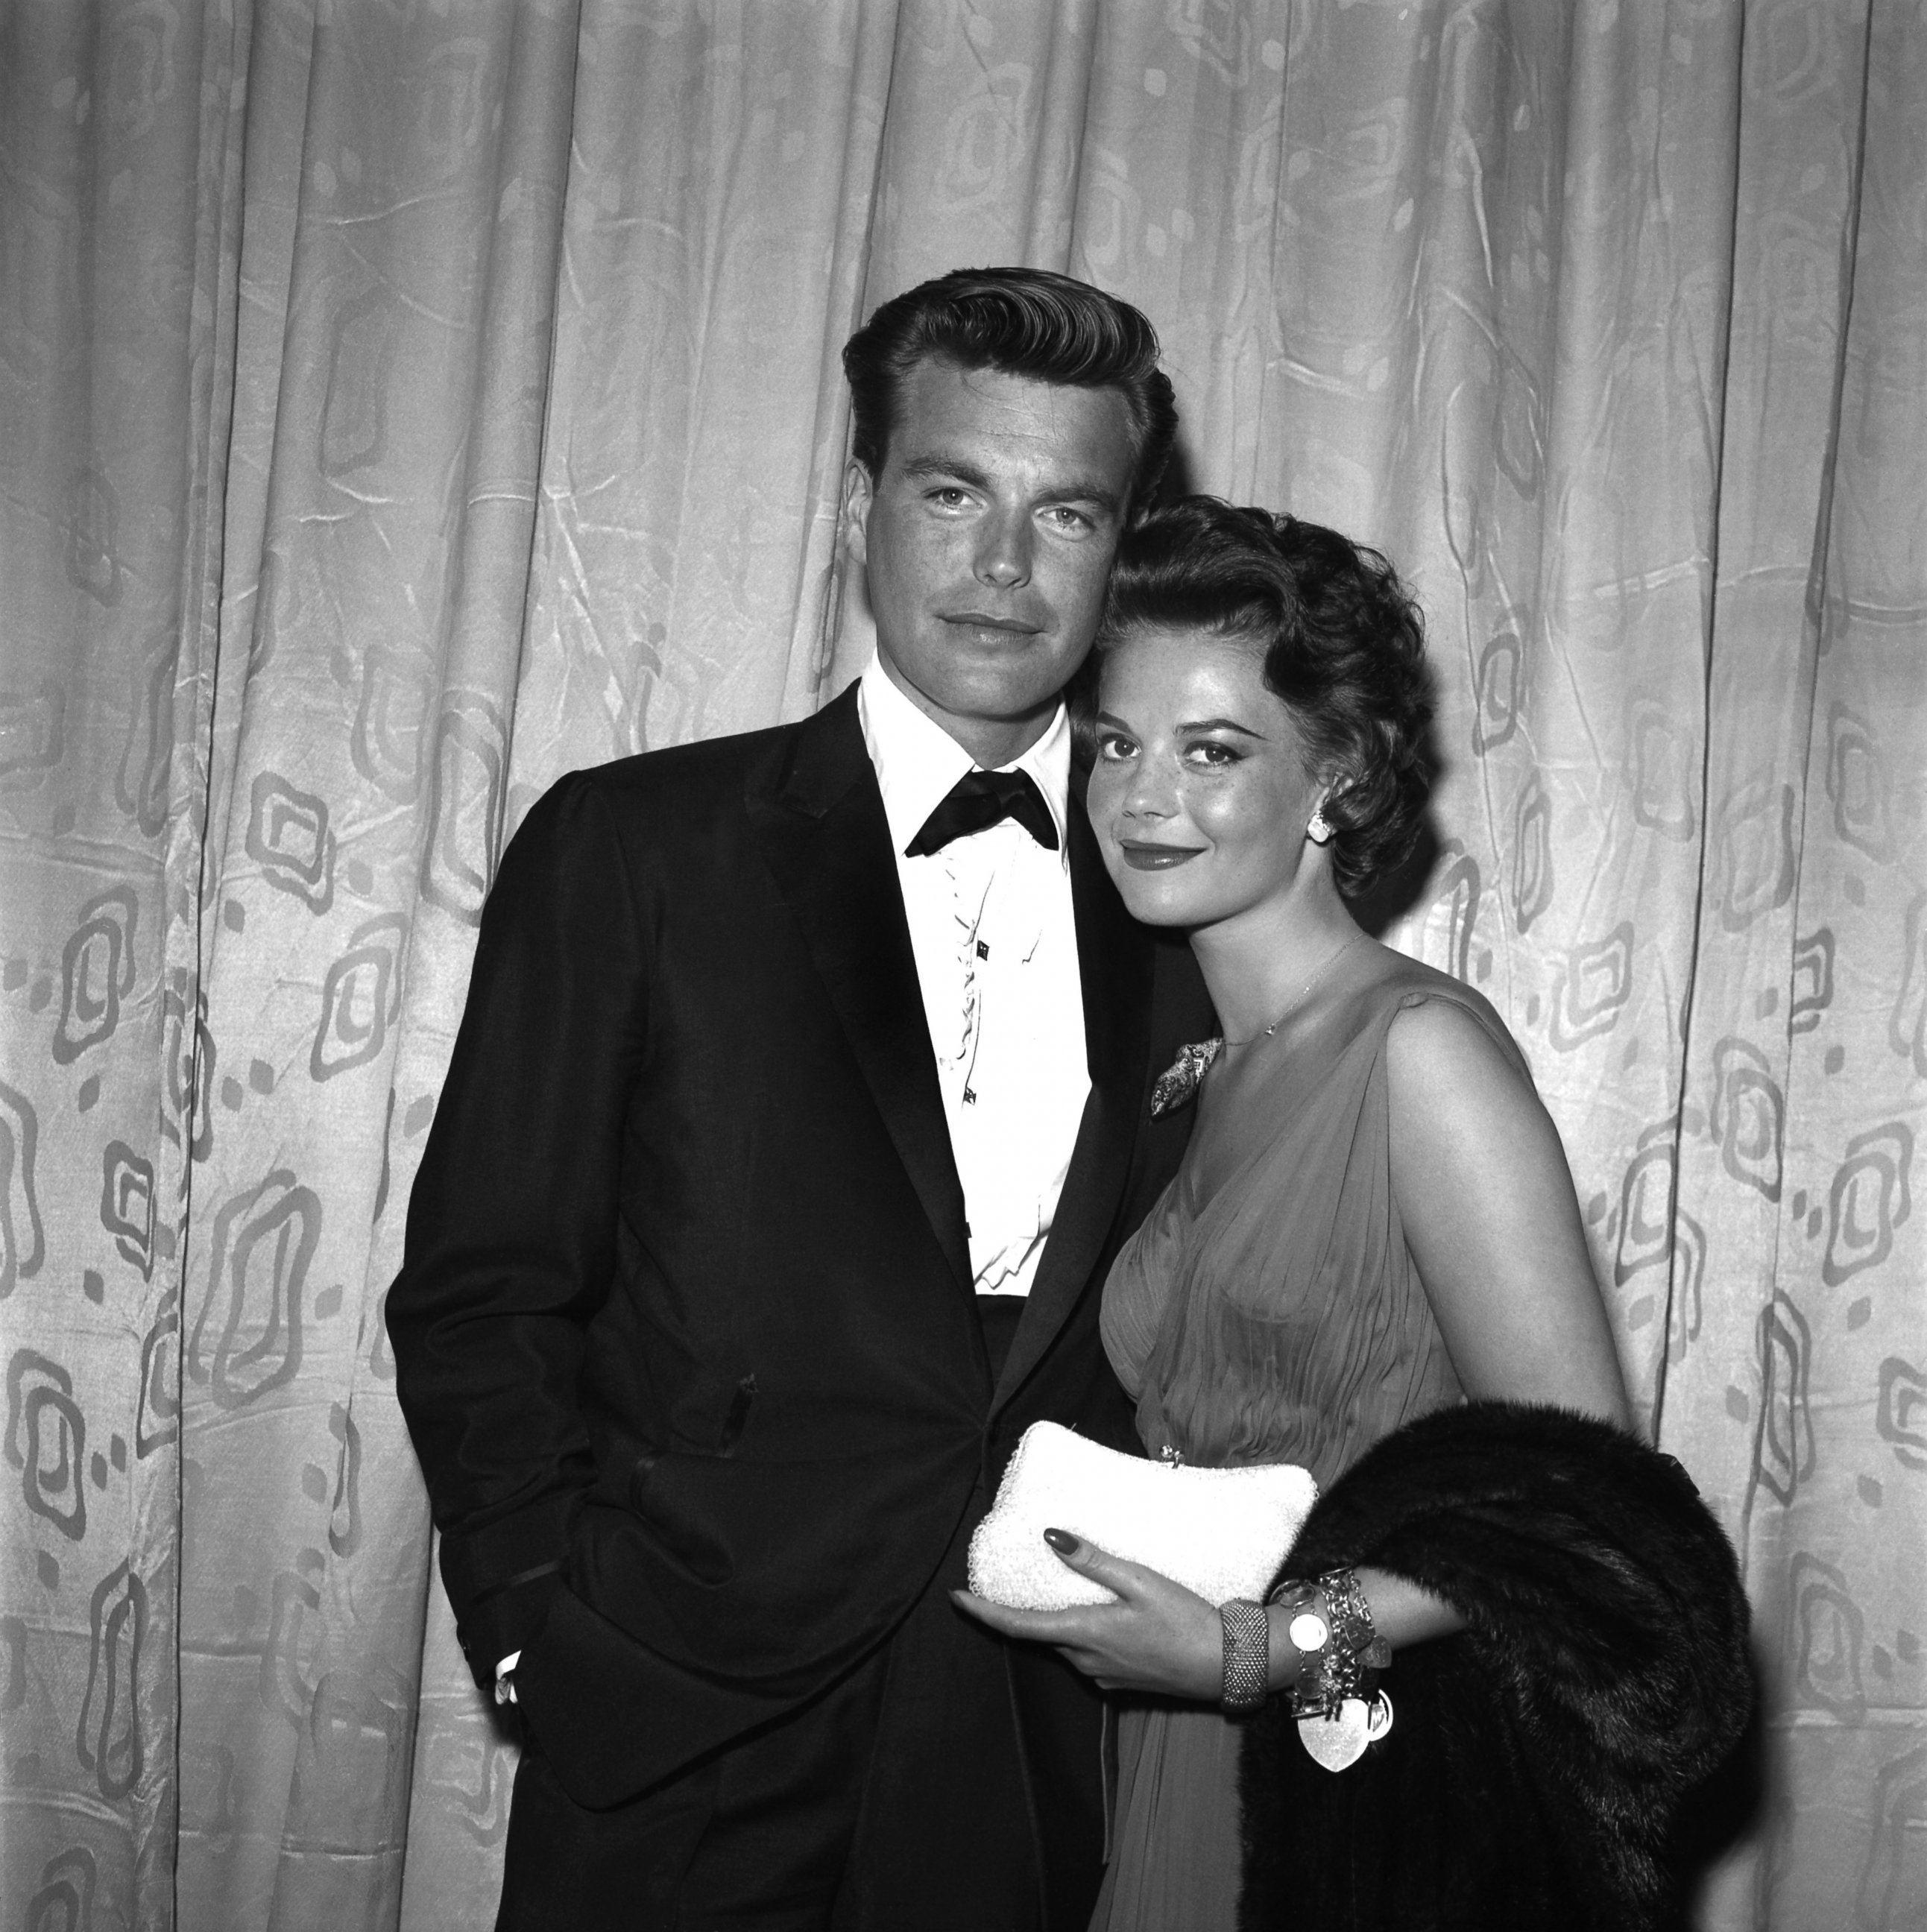 PHOTO: Actors Natalie Wood and Robert Wagner attend an event, in 1958, in Los Angeles.